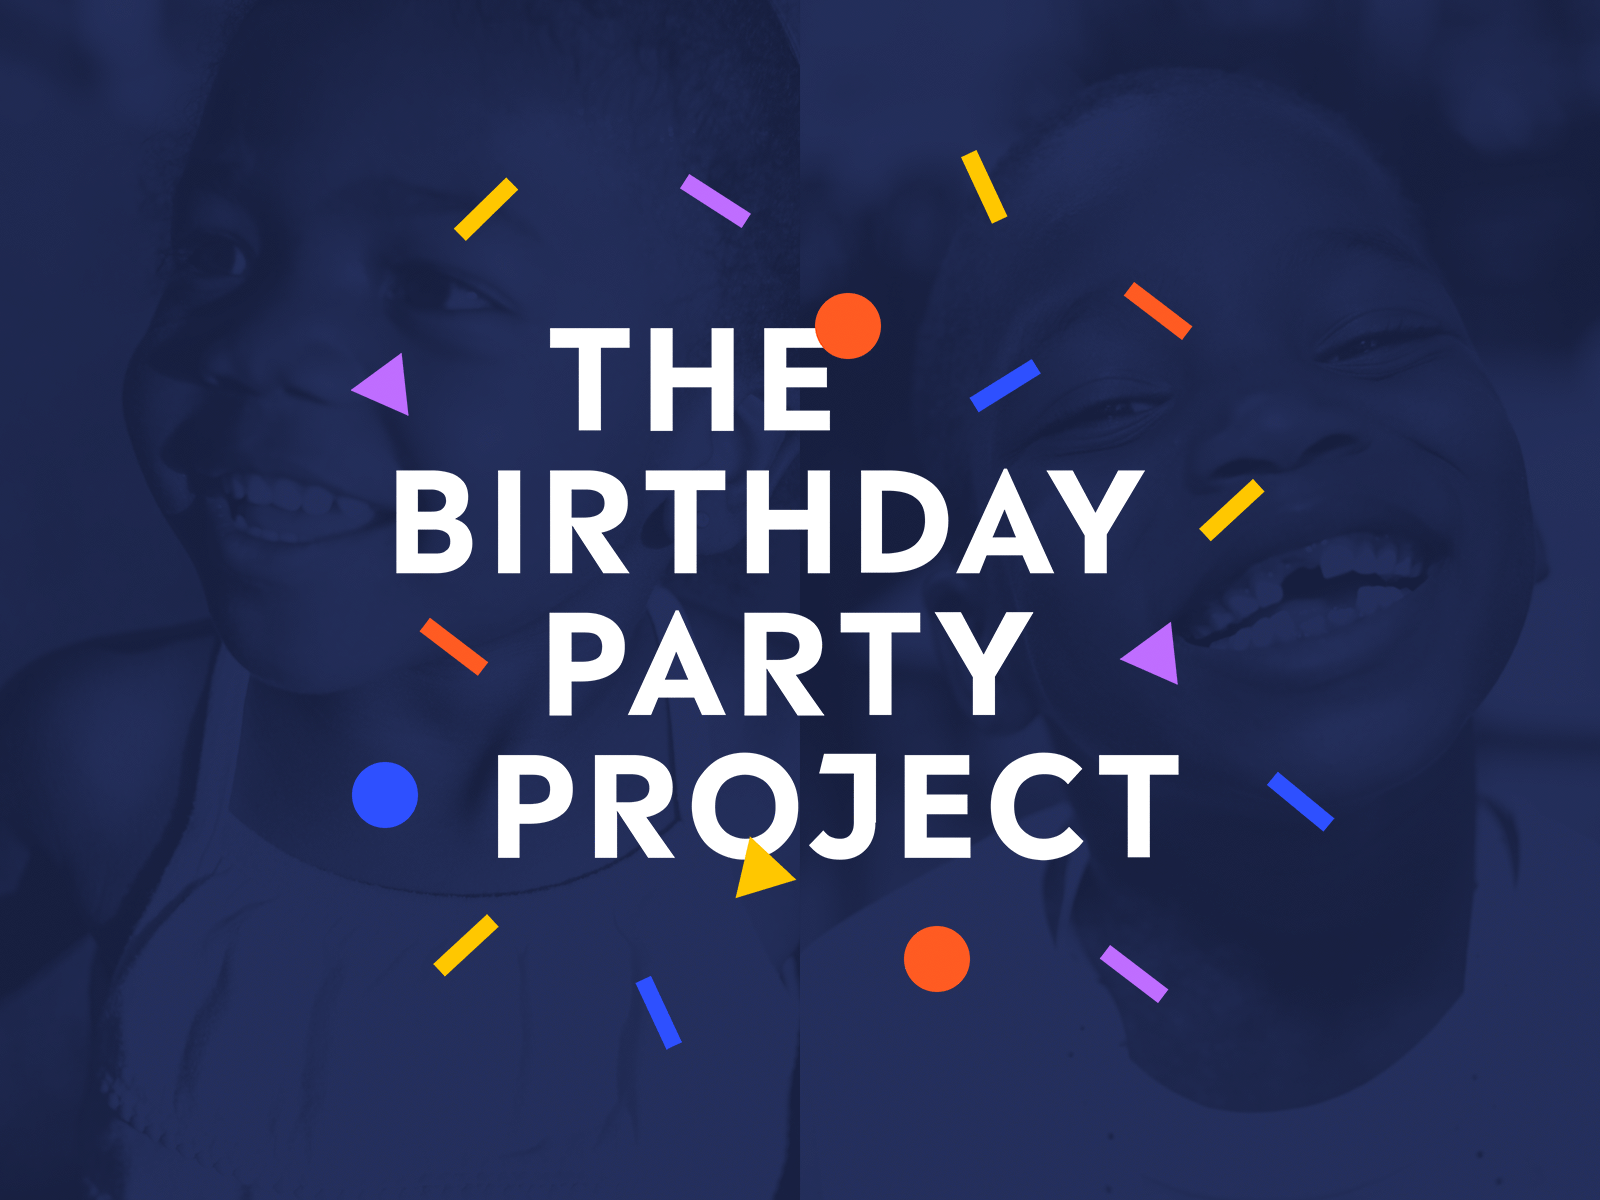 the-birthday-party-project-by-ryan-jarrell-for-tegan-on-dribbble